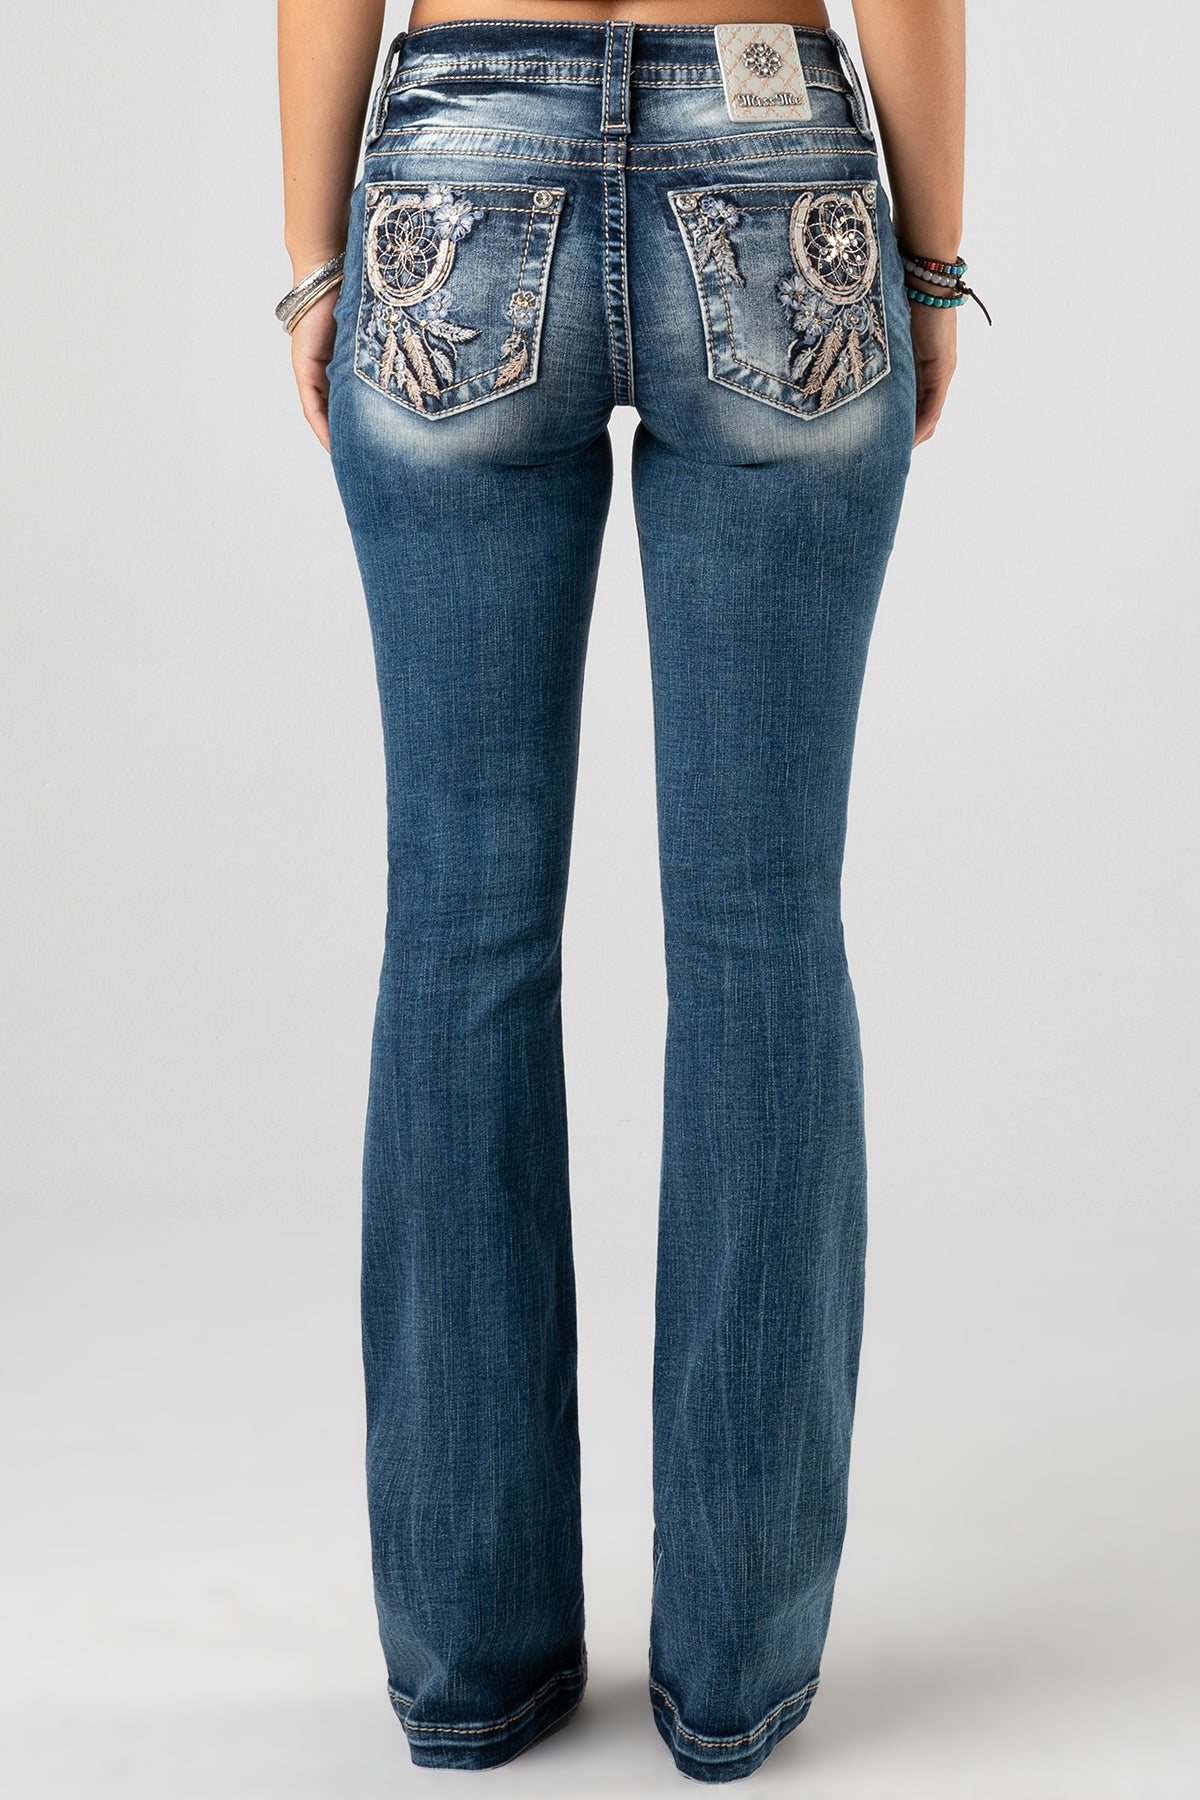 Woman Rhinestone Jeans Embroidered High Waisted Bootcut Jeans Size 1- 17